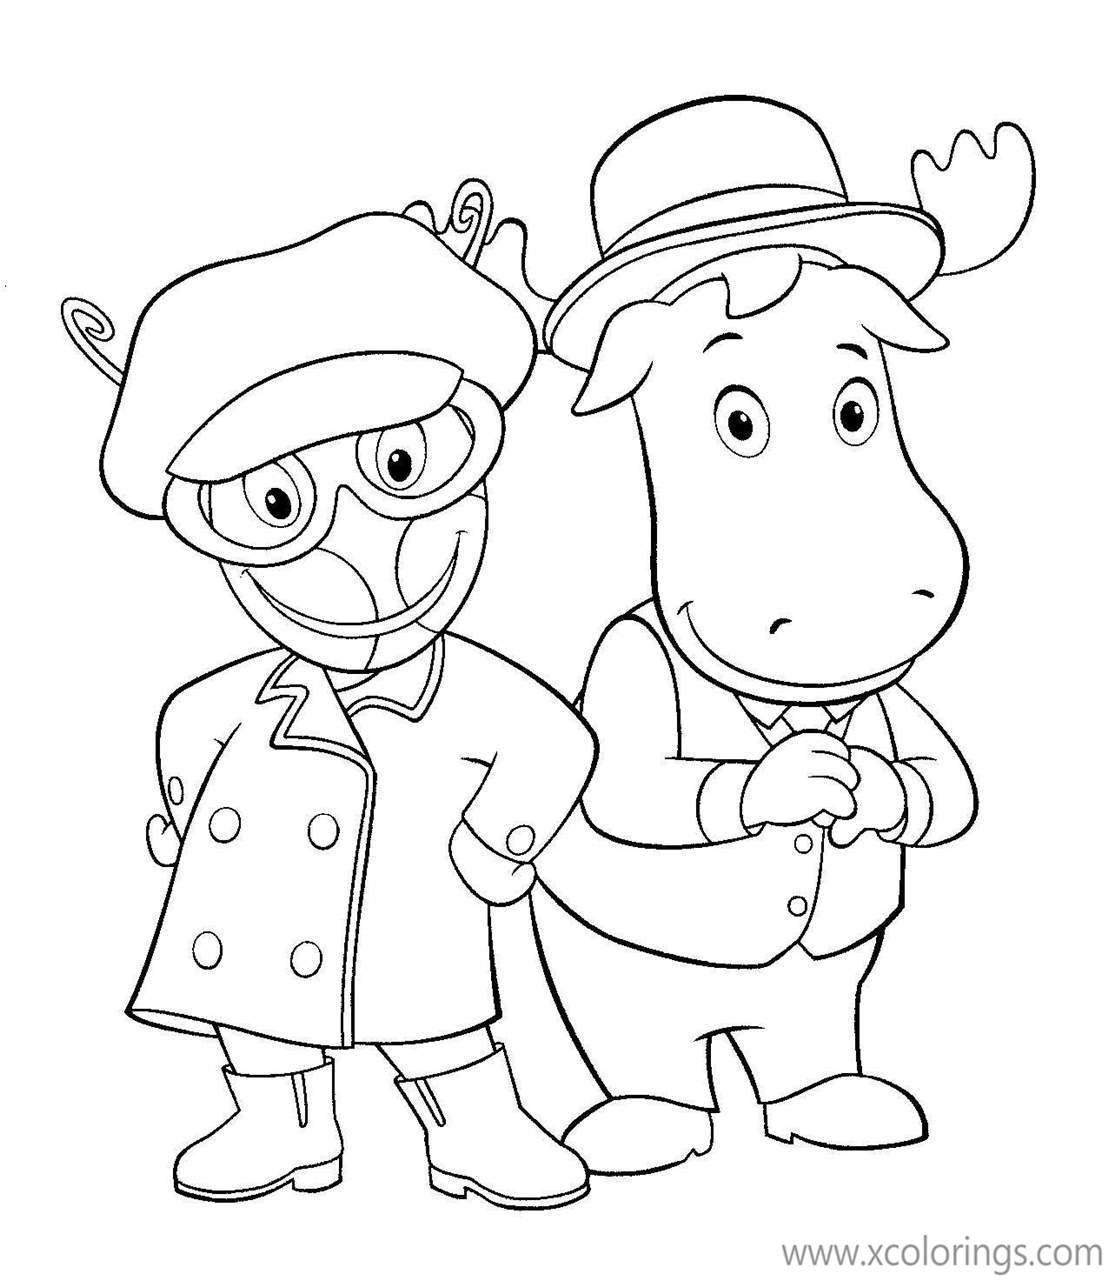 Free Backyardigans Coloring Pages Uniqua and Tyrone in the Hats printable